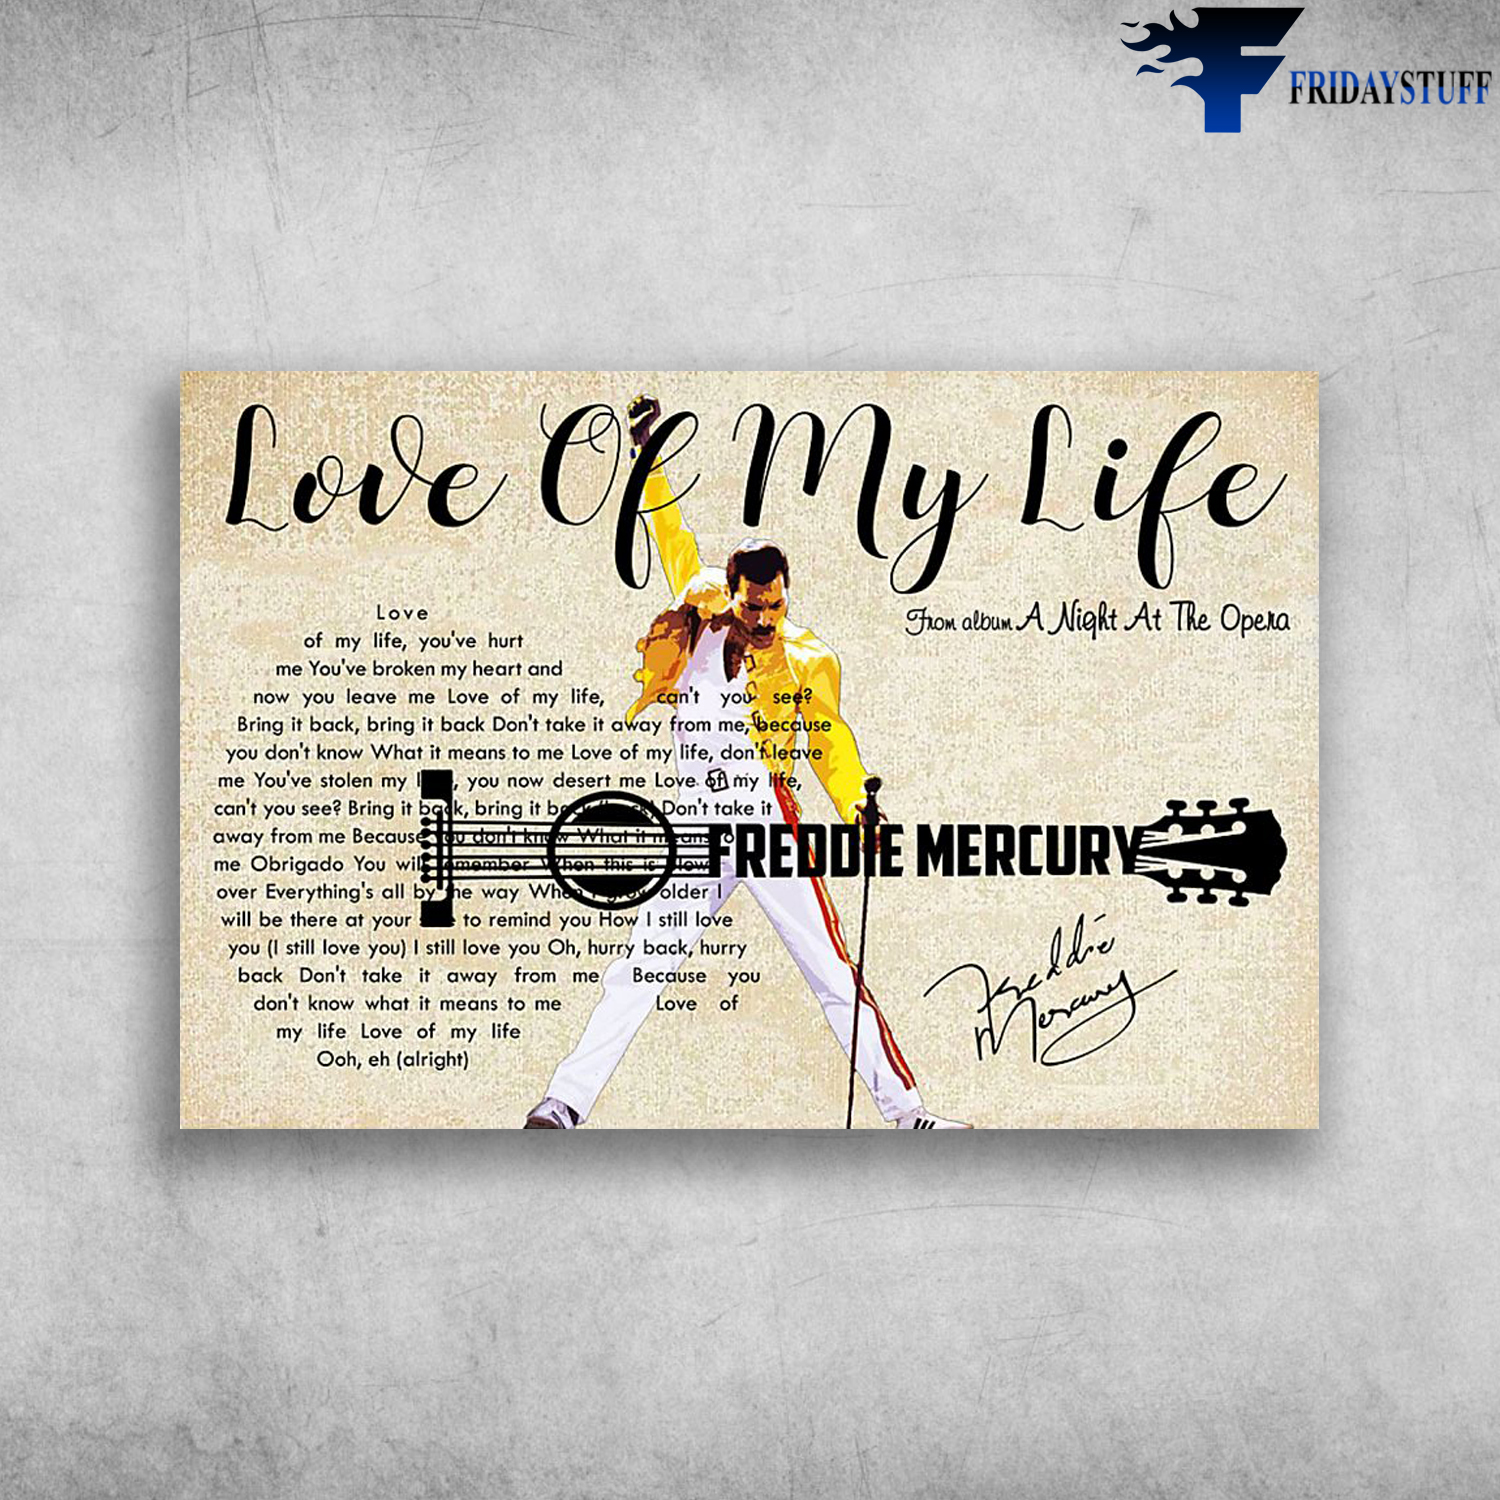 Love Of My Life From Album A Night At The Opera Freddie Mercury